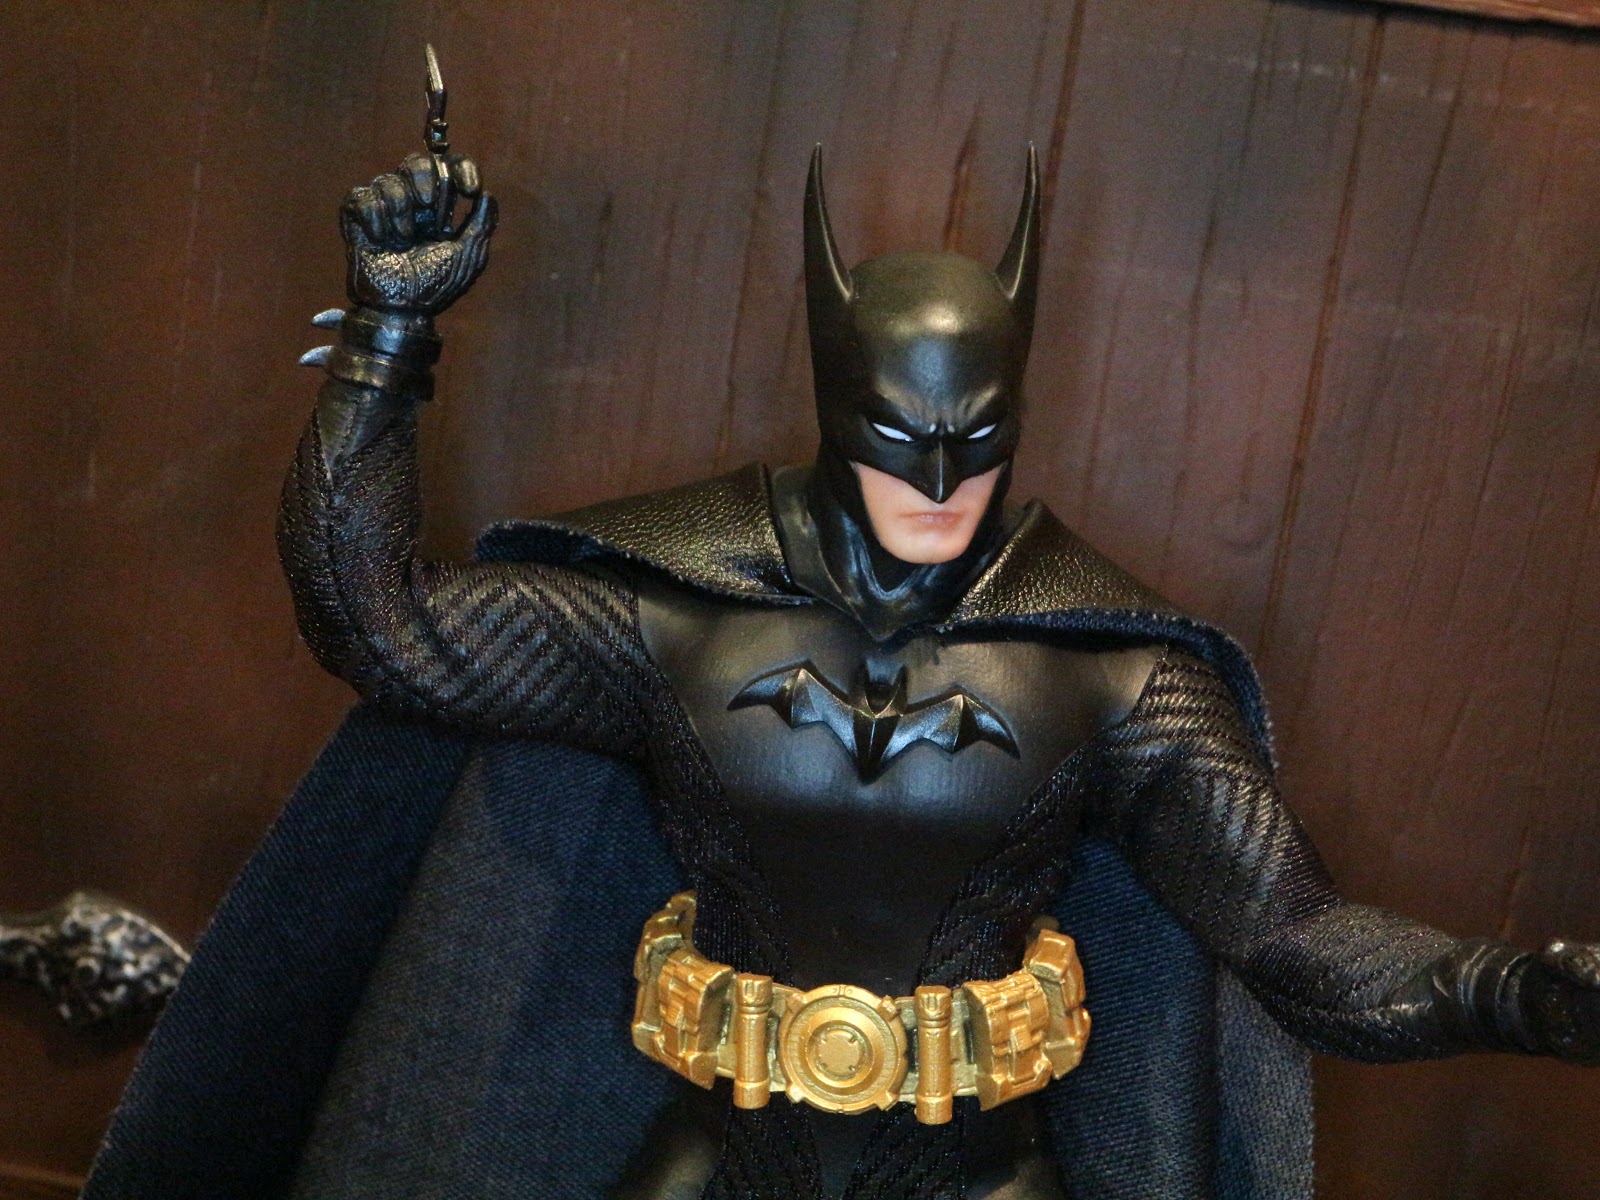 Action Figure Barbecue: Action Figure Review: Batman: Ascending Knight  (Mezco Exclusive) from One:12 Collective: DC Universe by Mezco